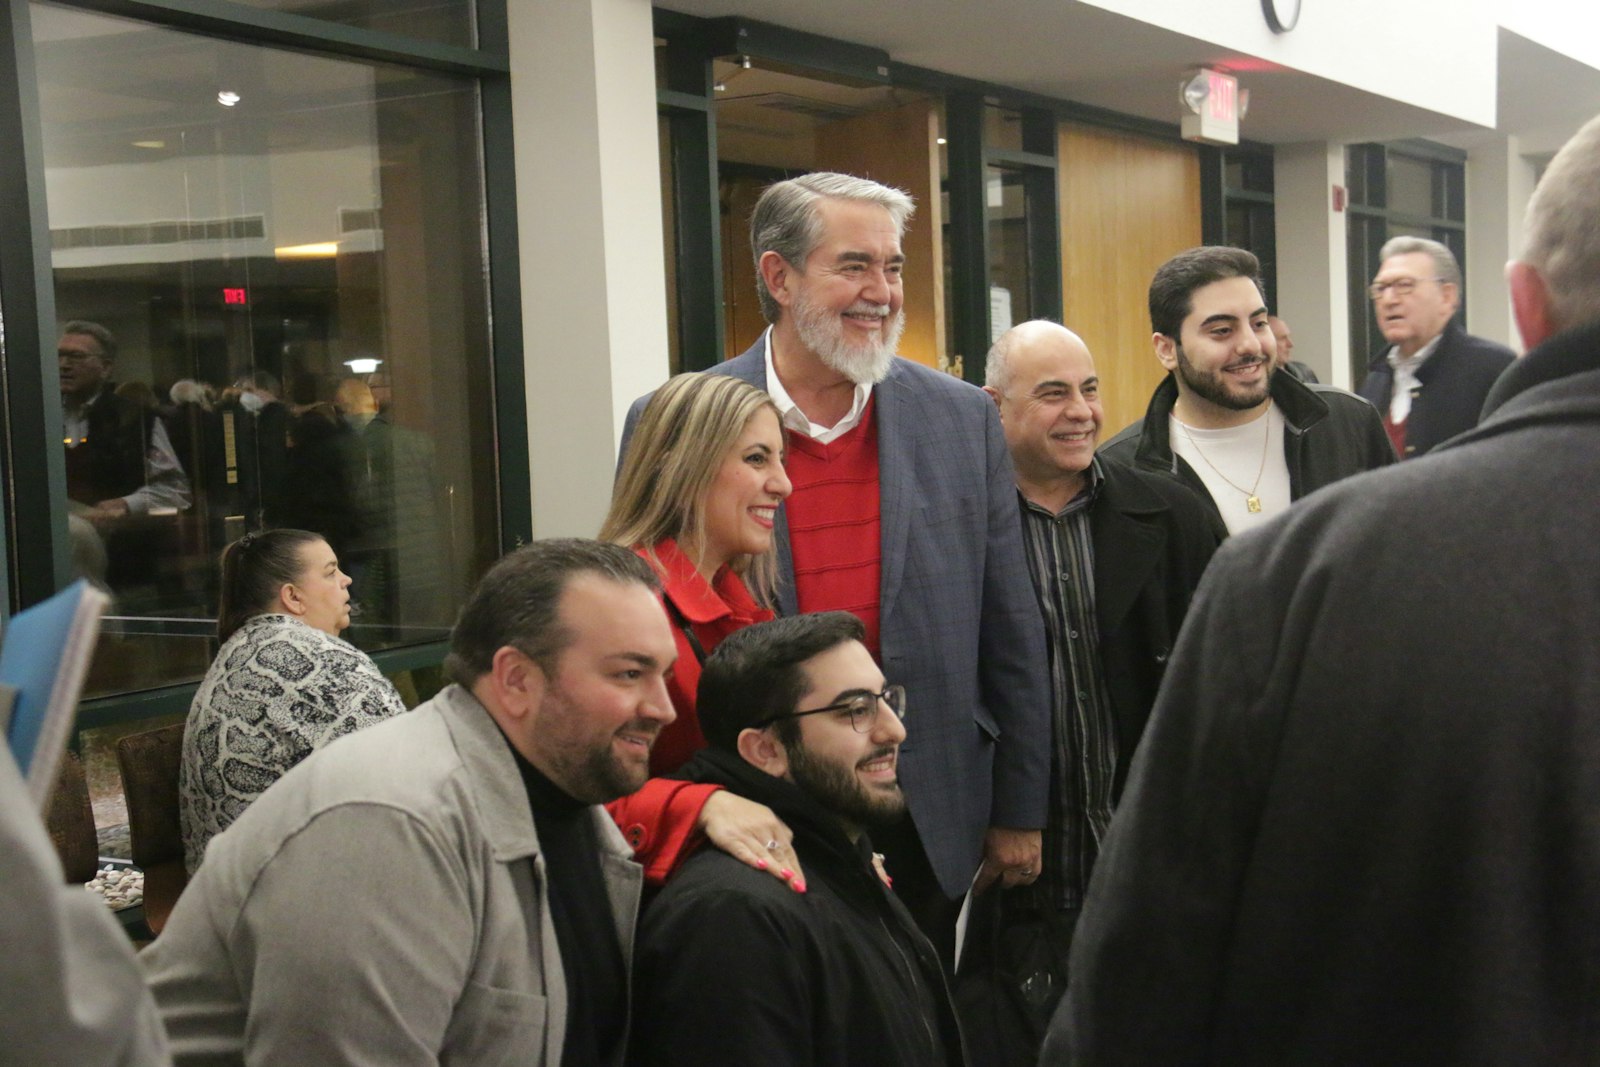 Dr. Scott Hahn gathers with fans and admirers after his Lenten retreat at St. Kieran Parish in Shelby Township. The Lenten retreat was part of an effort by the parish to bring in more Catholic speakers to explain the faith, St. Kieran pastor, Fr. Joseph Mallia said.